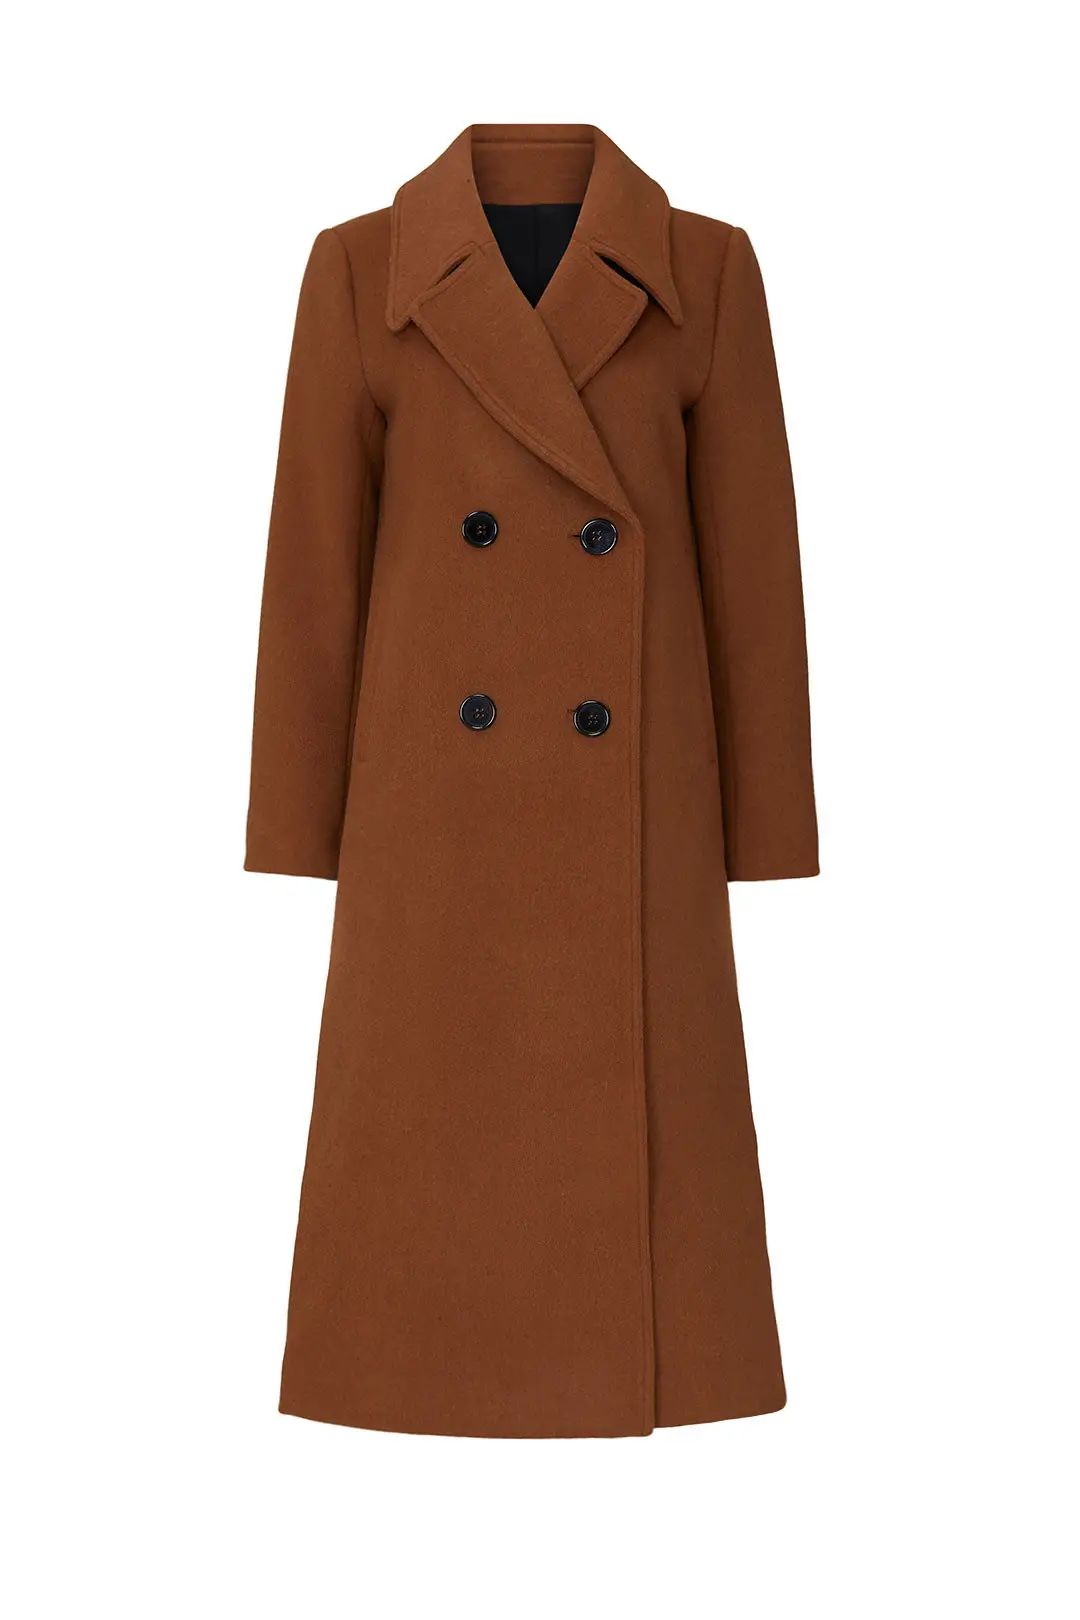 Nicholas Camel Wool Double Breasted Coat | Rent the Runway